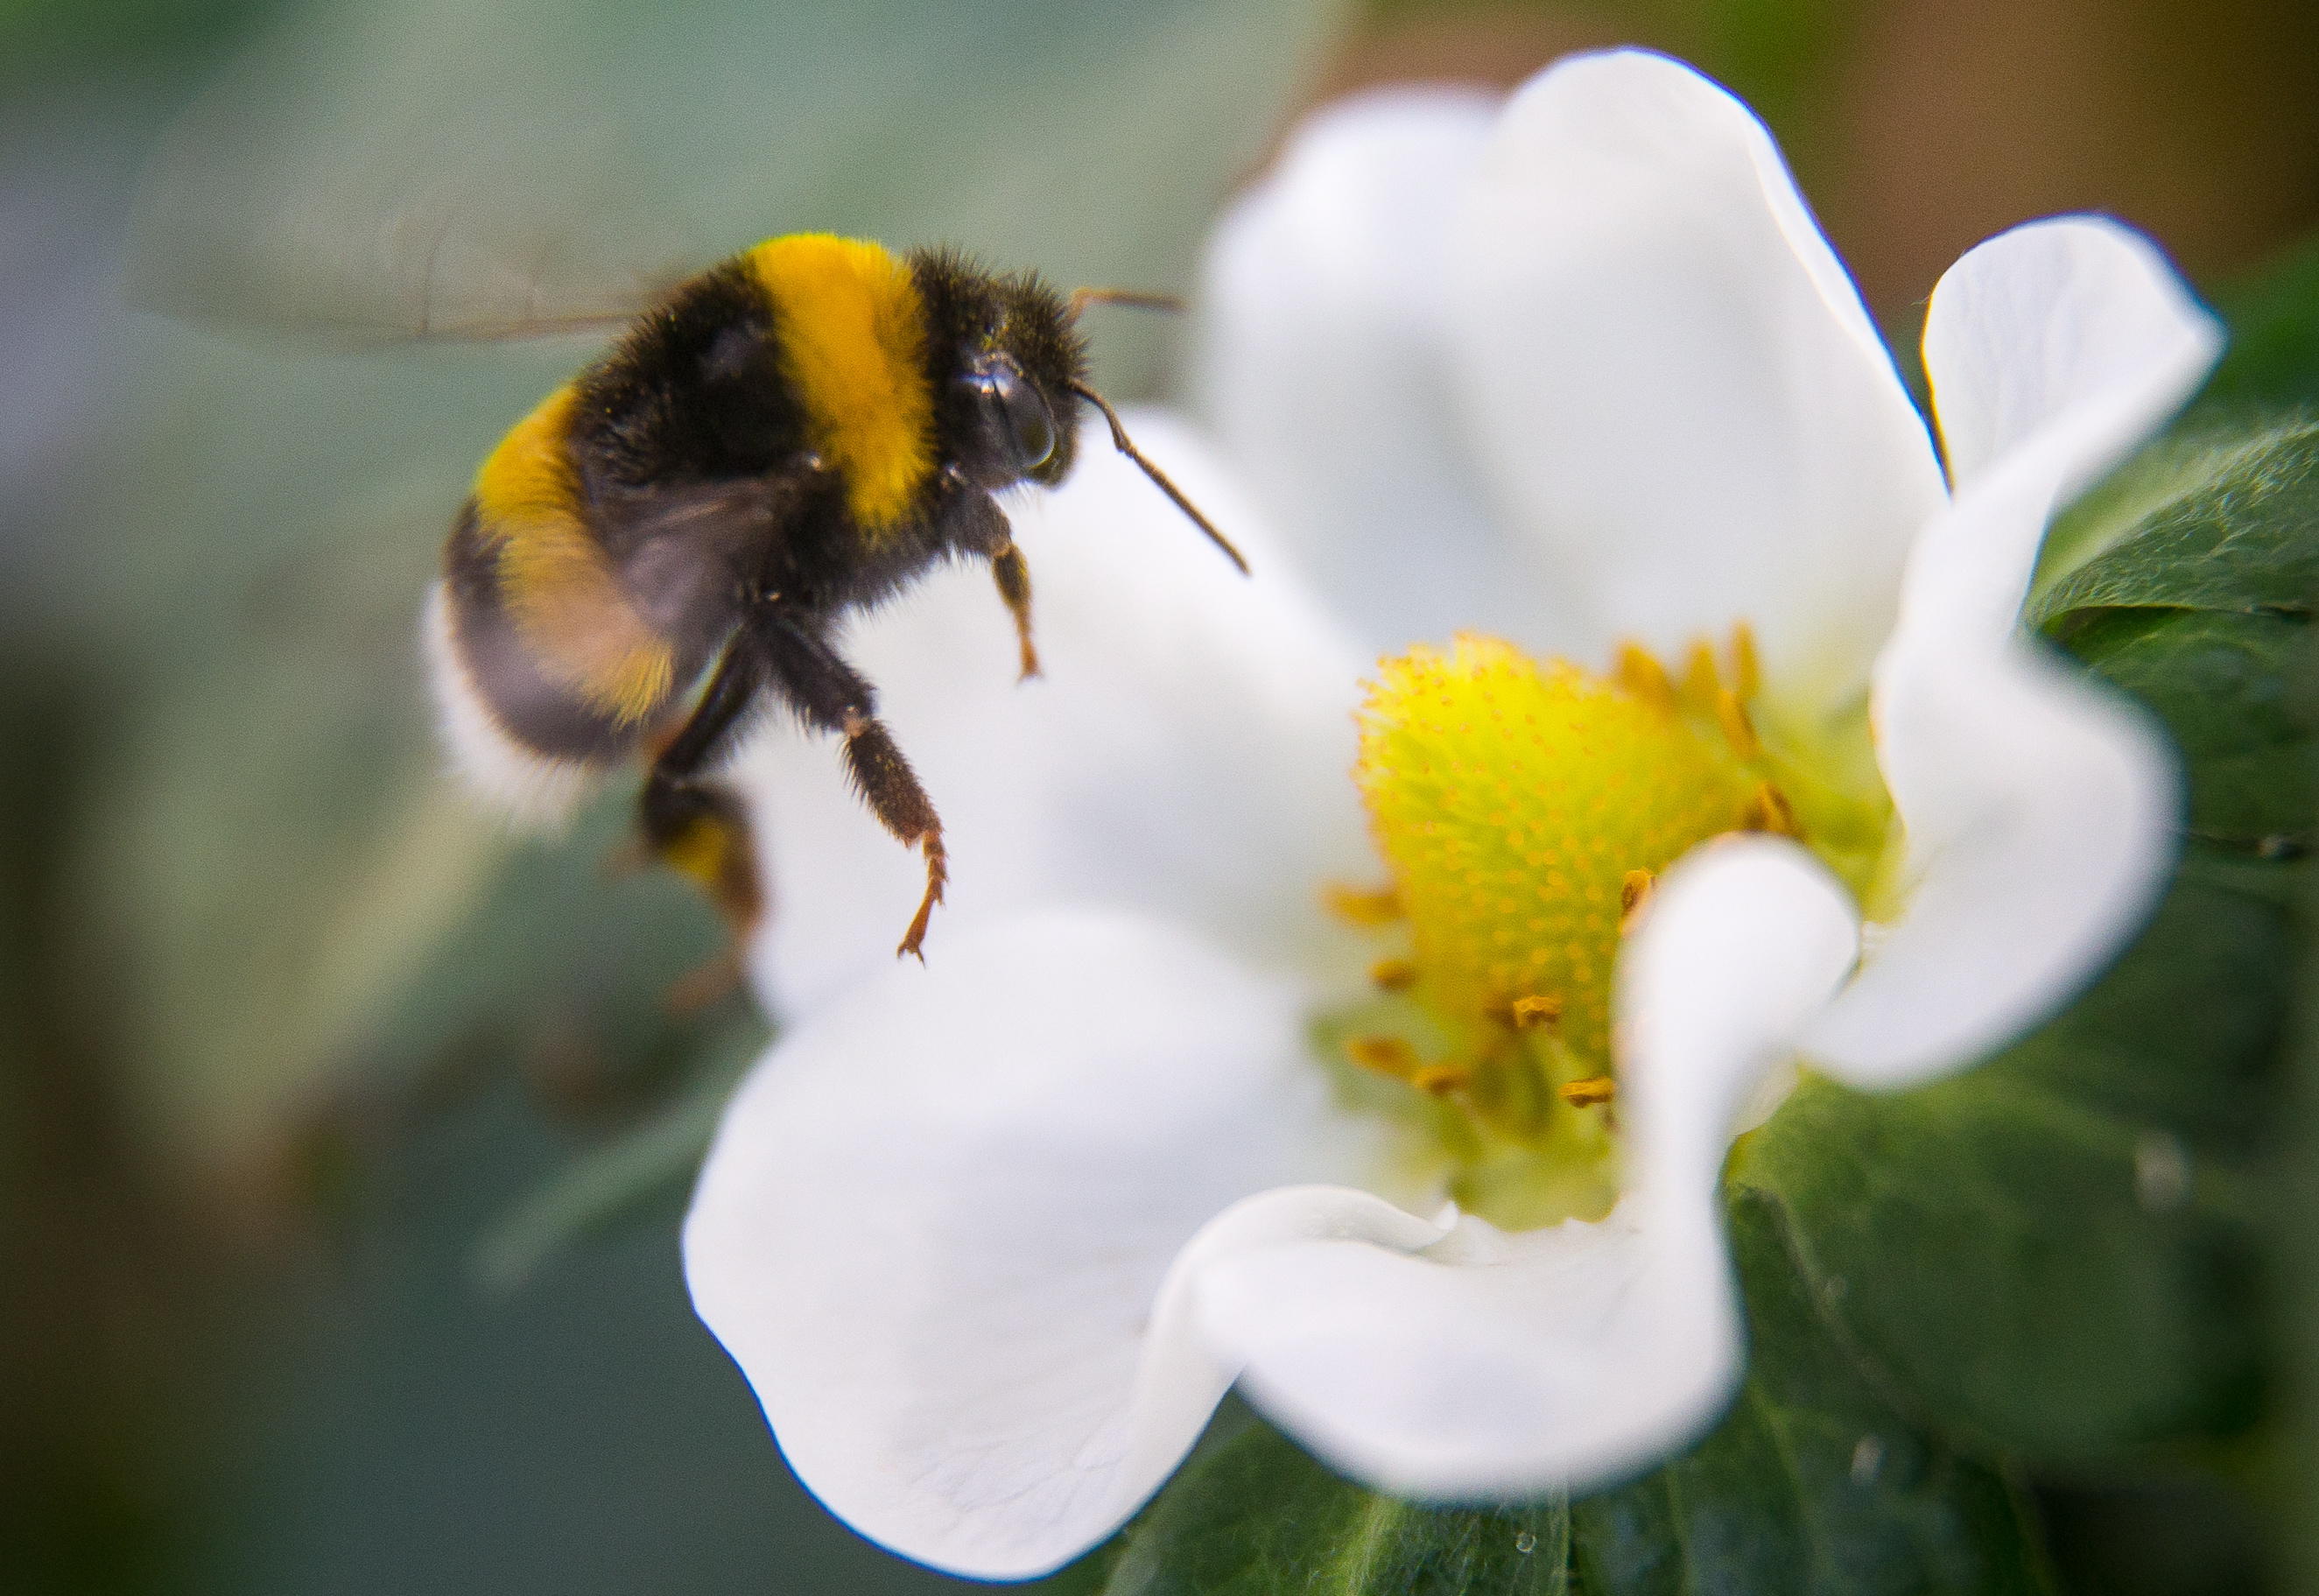 Caffeine Boosts Bees' Focus and Helps Them Learn